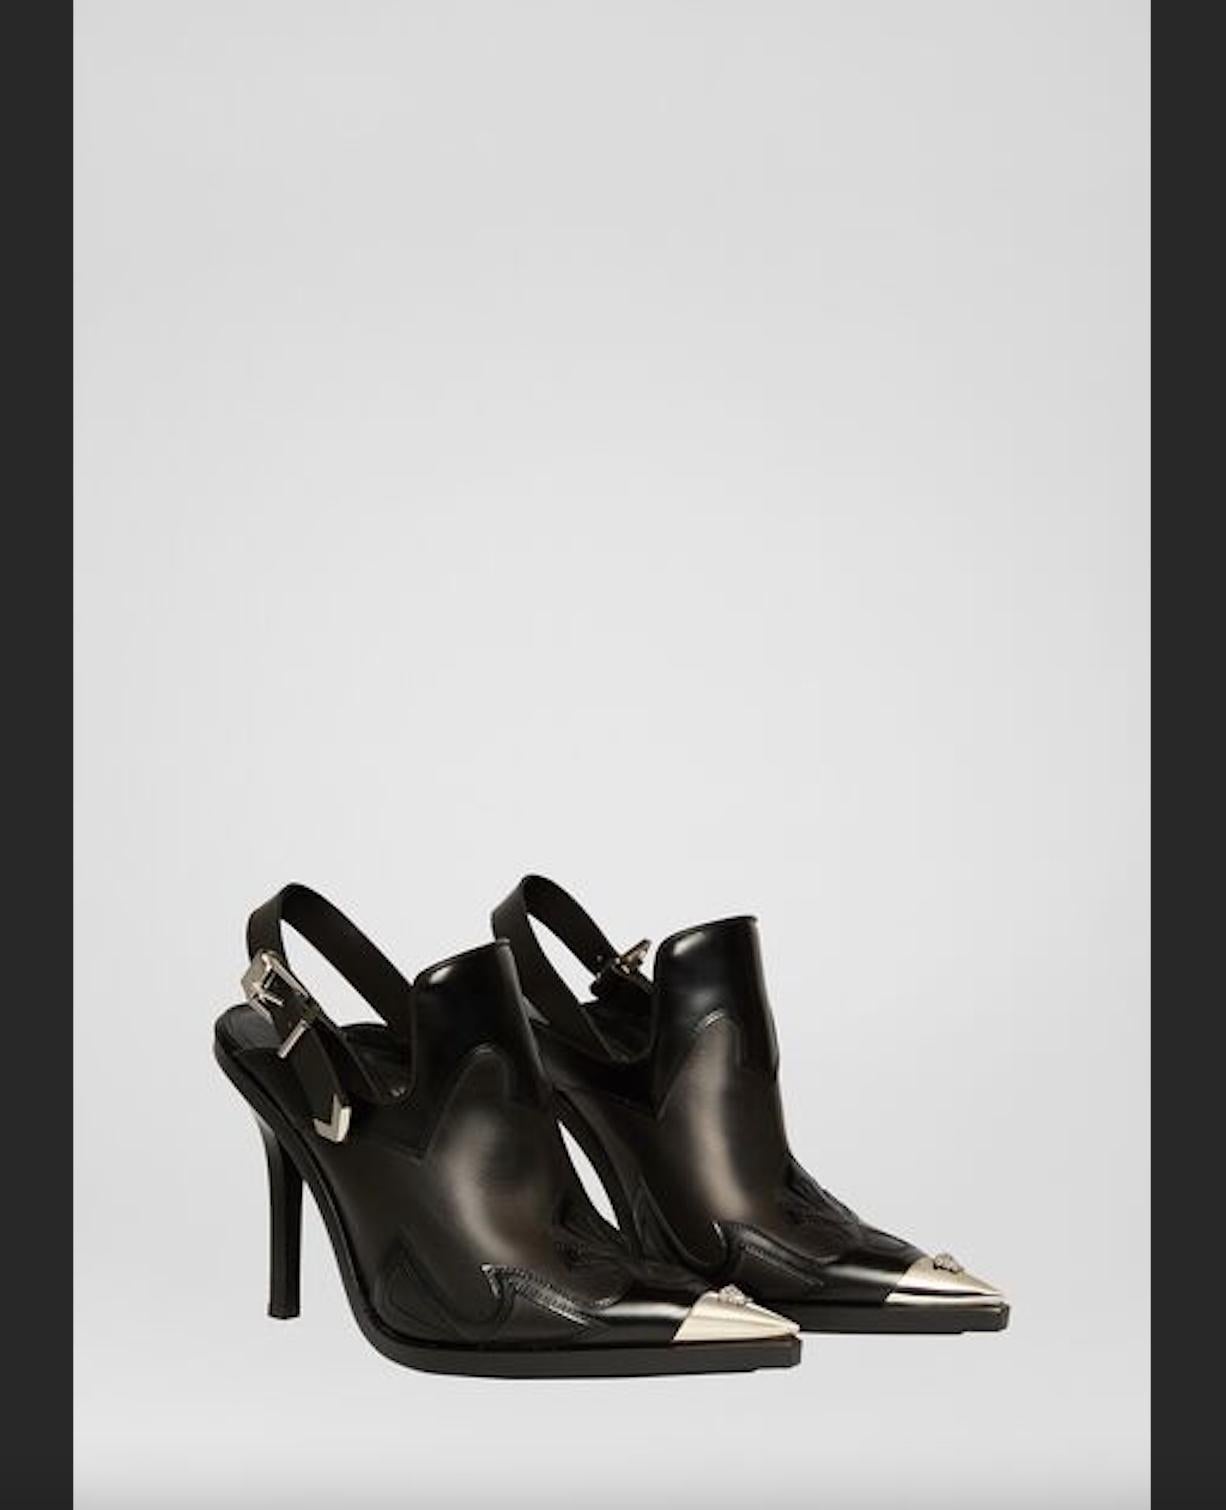 Versace Black Leather V-western Slingback Boot / Pump

These Versace heels embrace a chic western vibe. Called the V-Western sling back pumps, it is enriched with western-style stitching and palladium-tone toe accent embellished with a Medusa head.